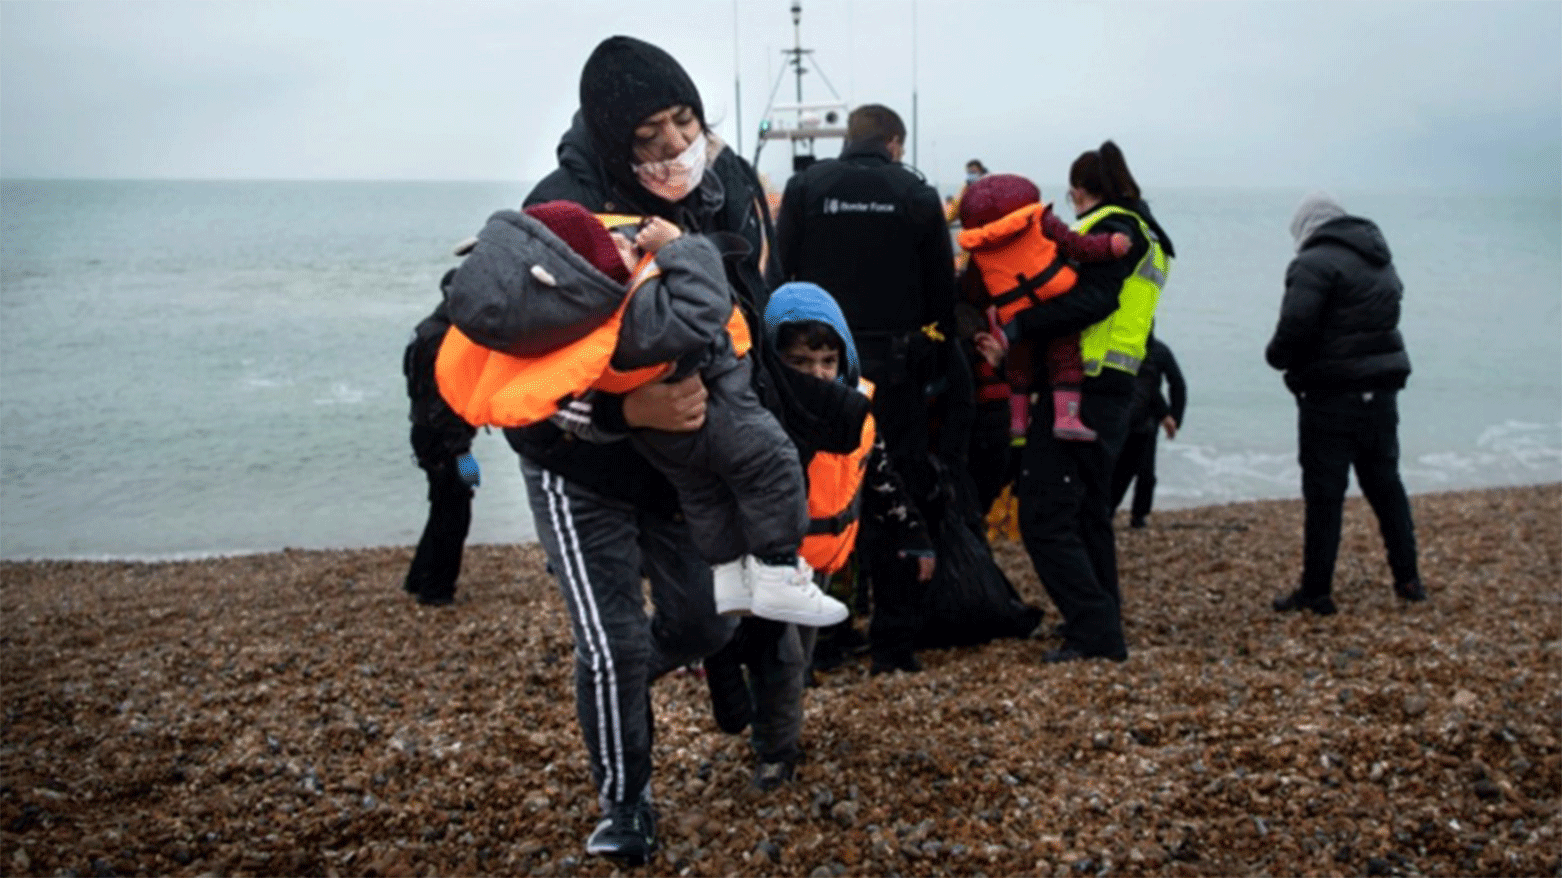 From Bulgaria to the English Channel tracing trafficked migrant boats